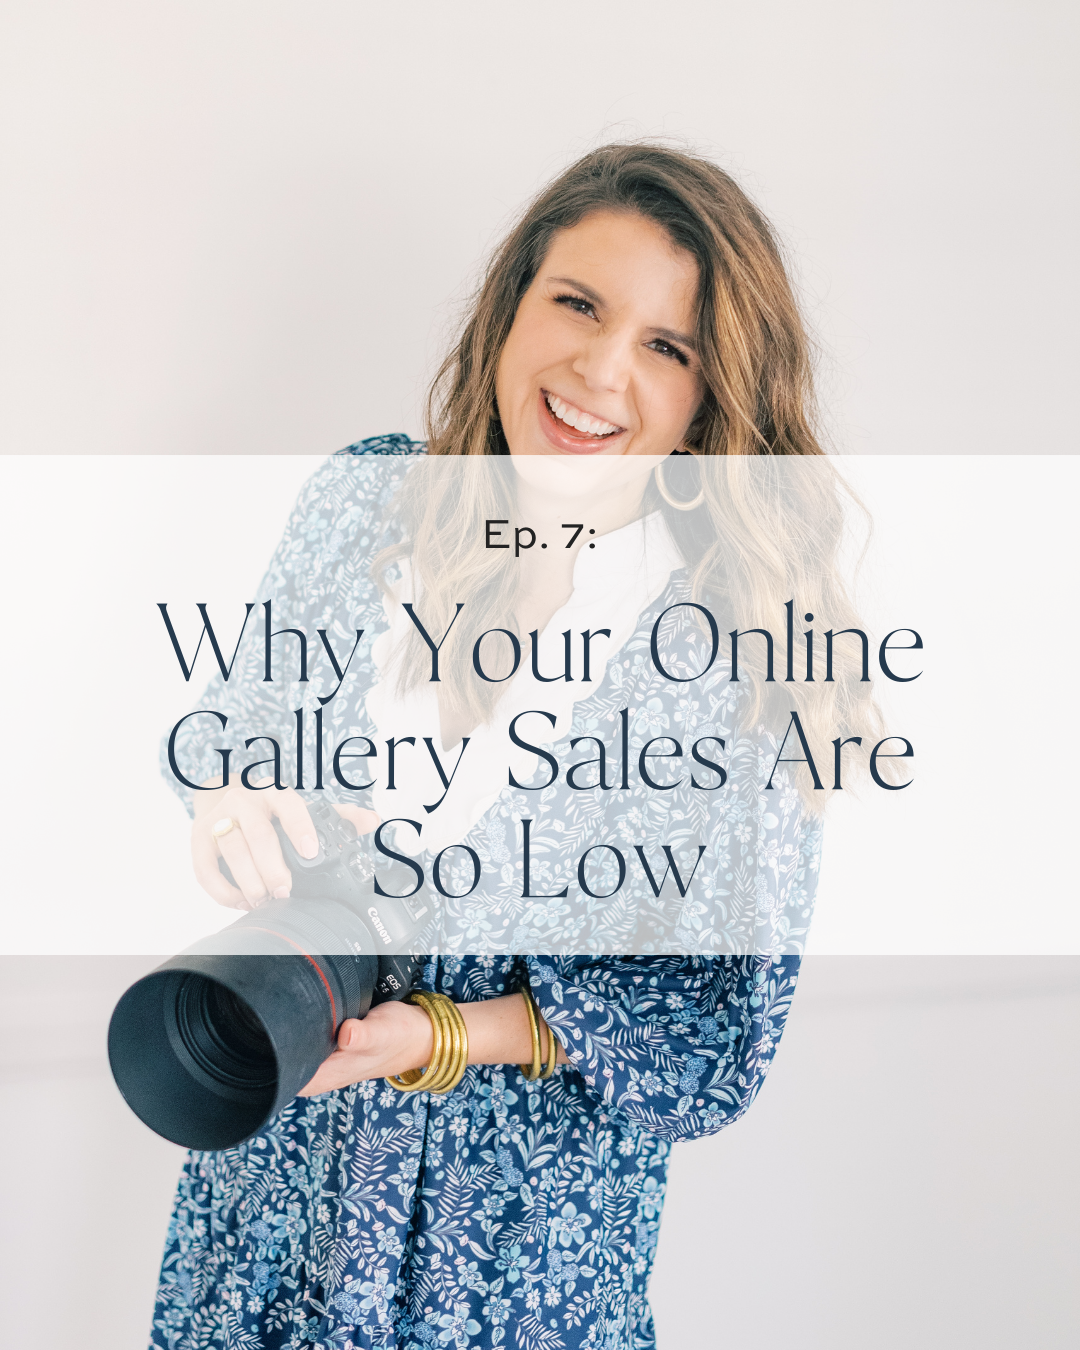 Why Your Online Gallery Sales Are So Low